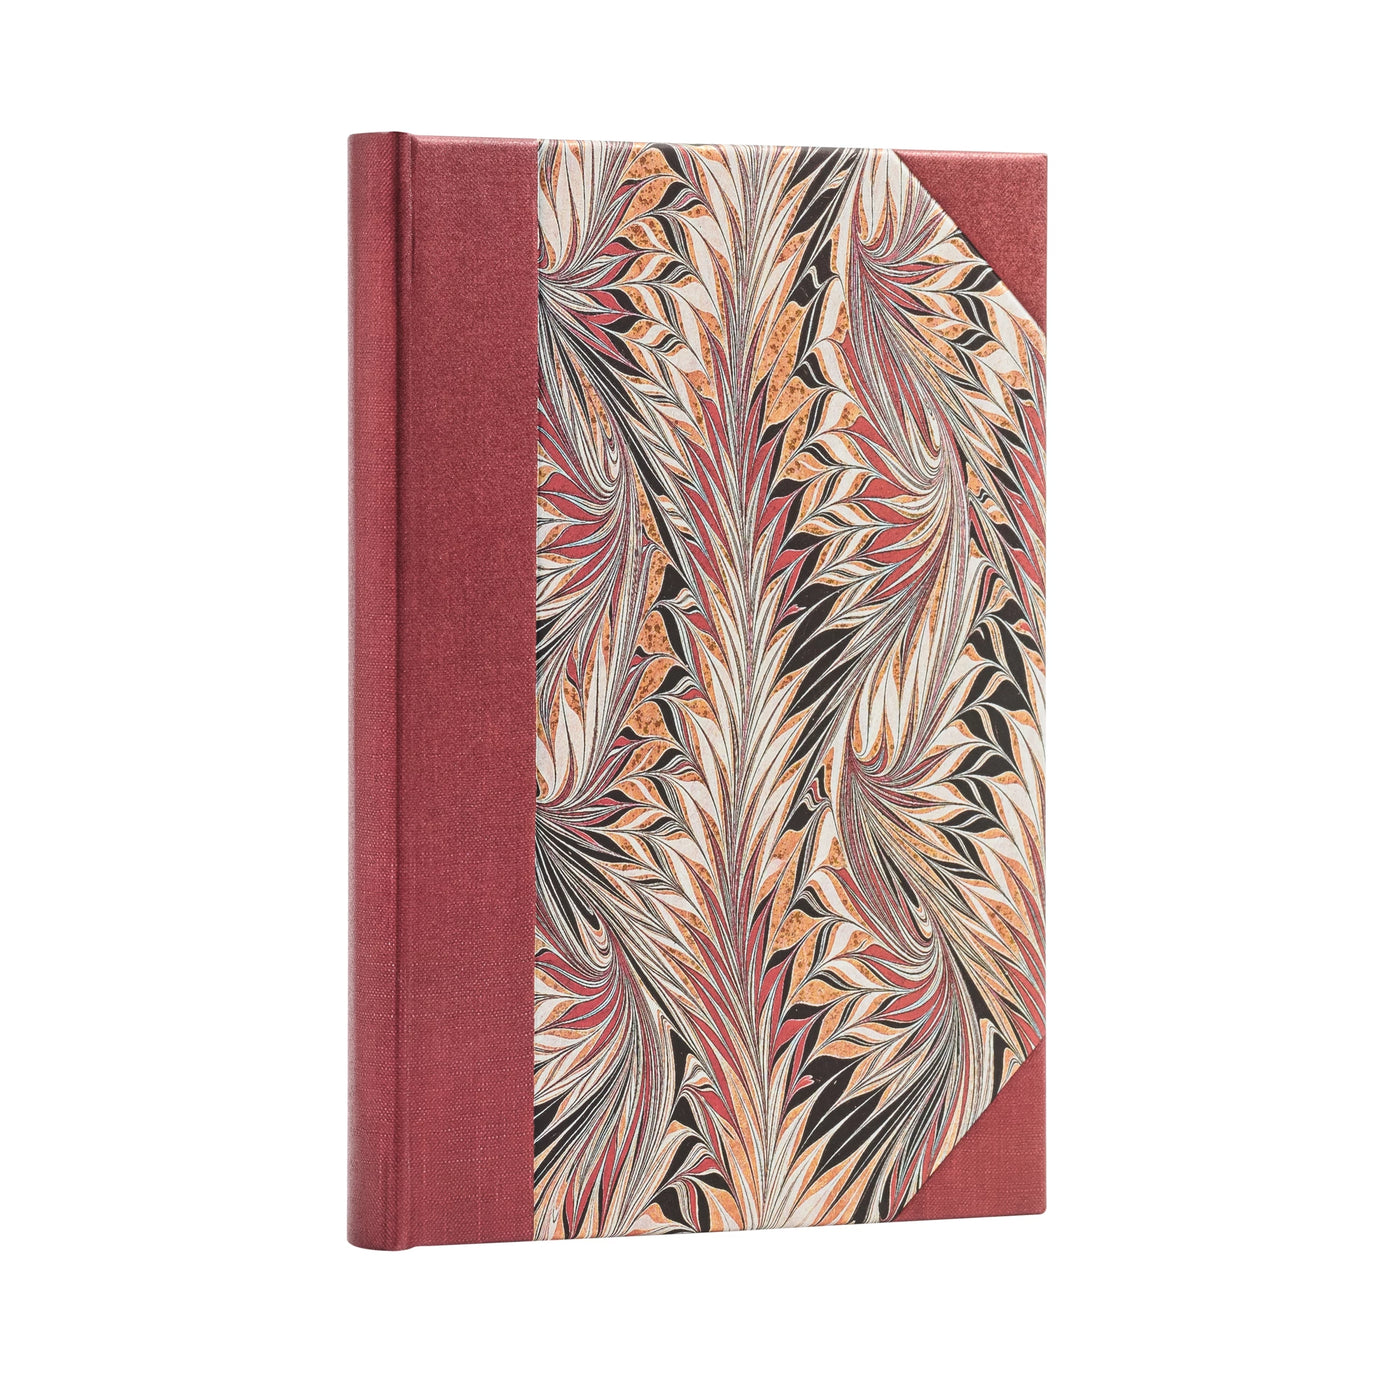 Paperblanks Rubedo - Cockerell Marbled Paper Midi 5x7 Inch Journal